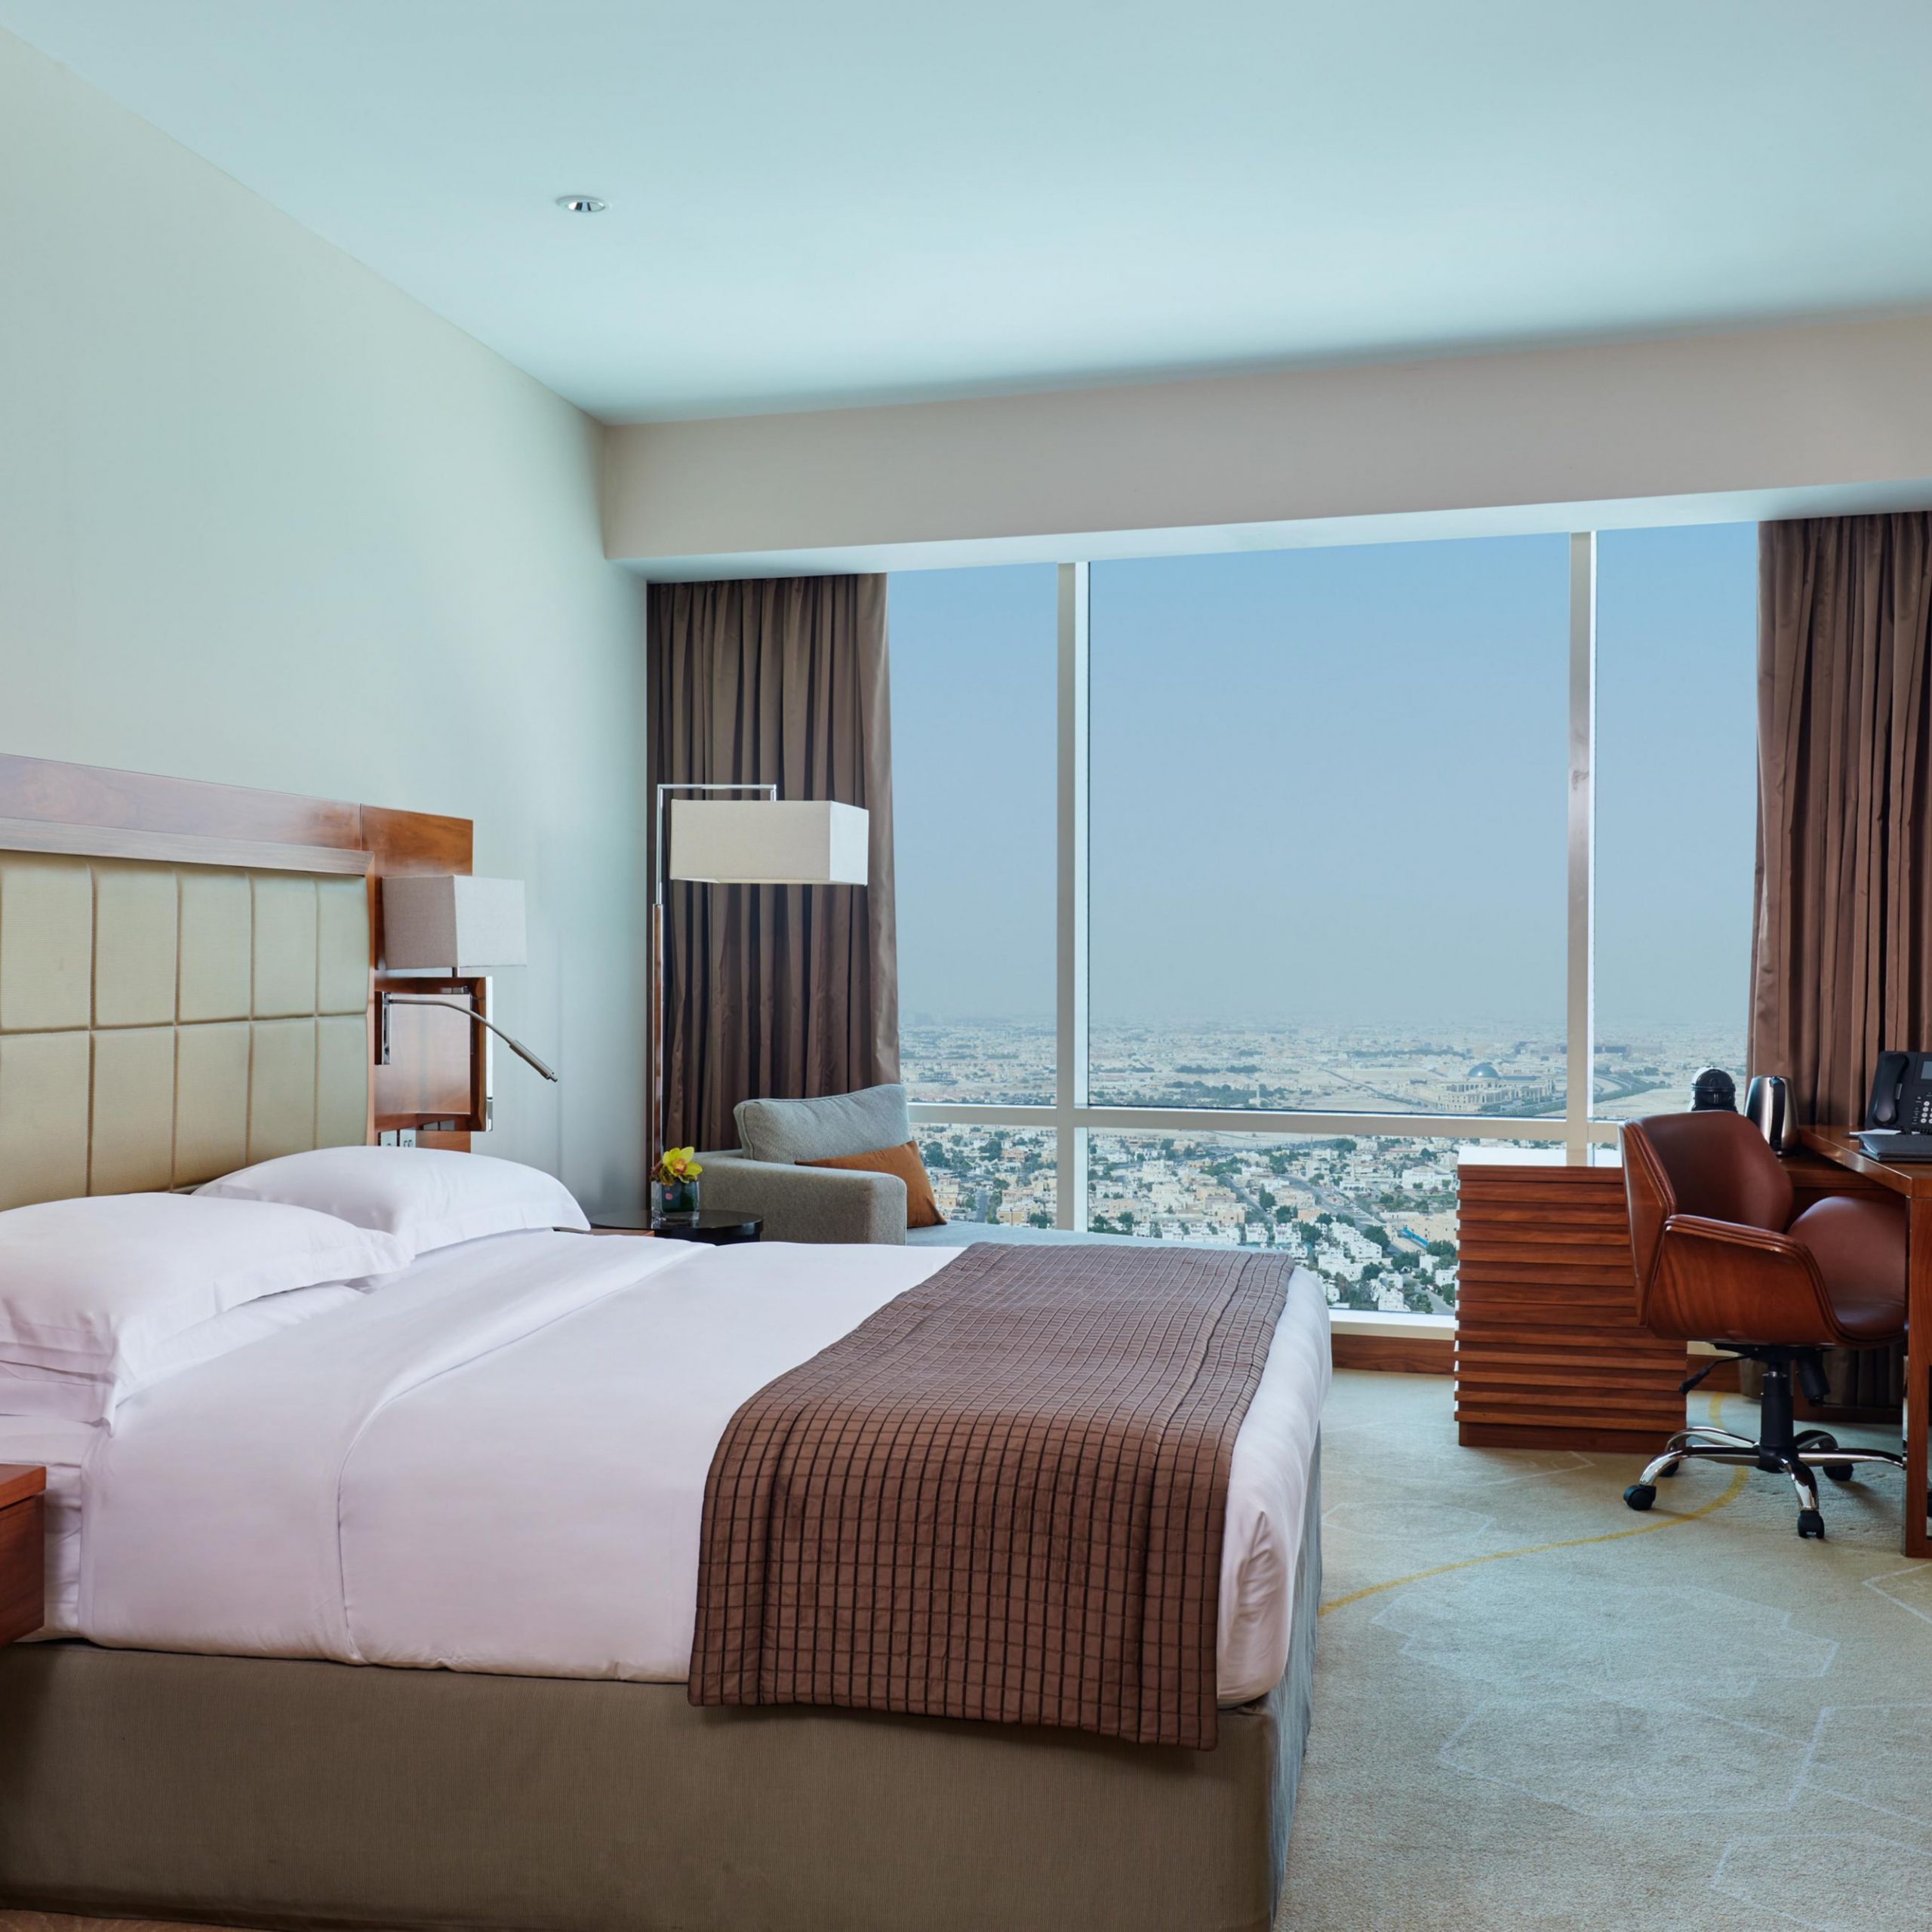 A guest suite room with bed, desk and a reclined sofa by a large window overlooking the city of Doha